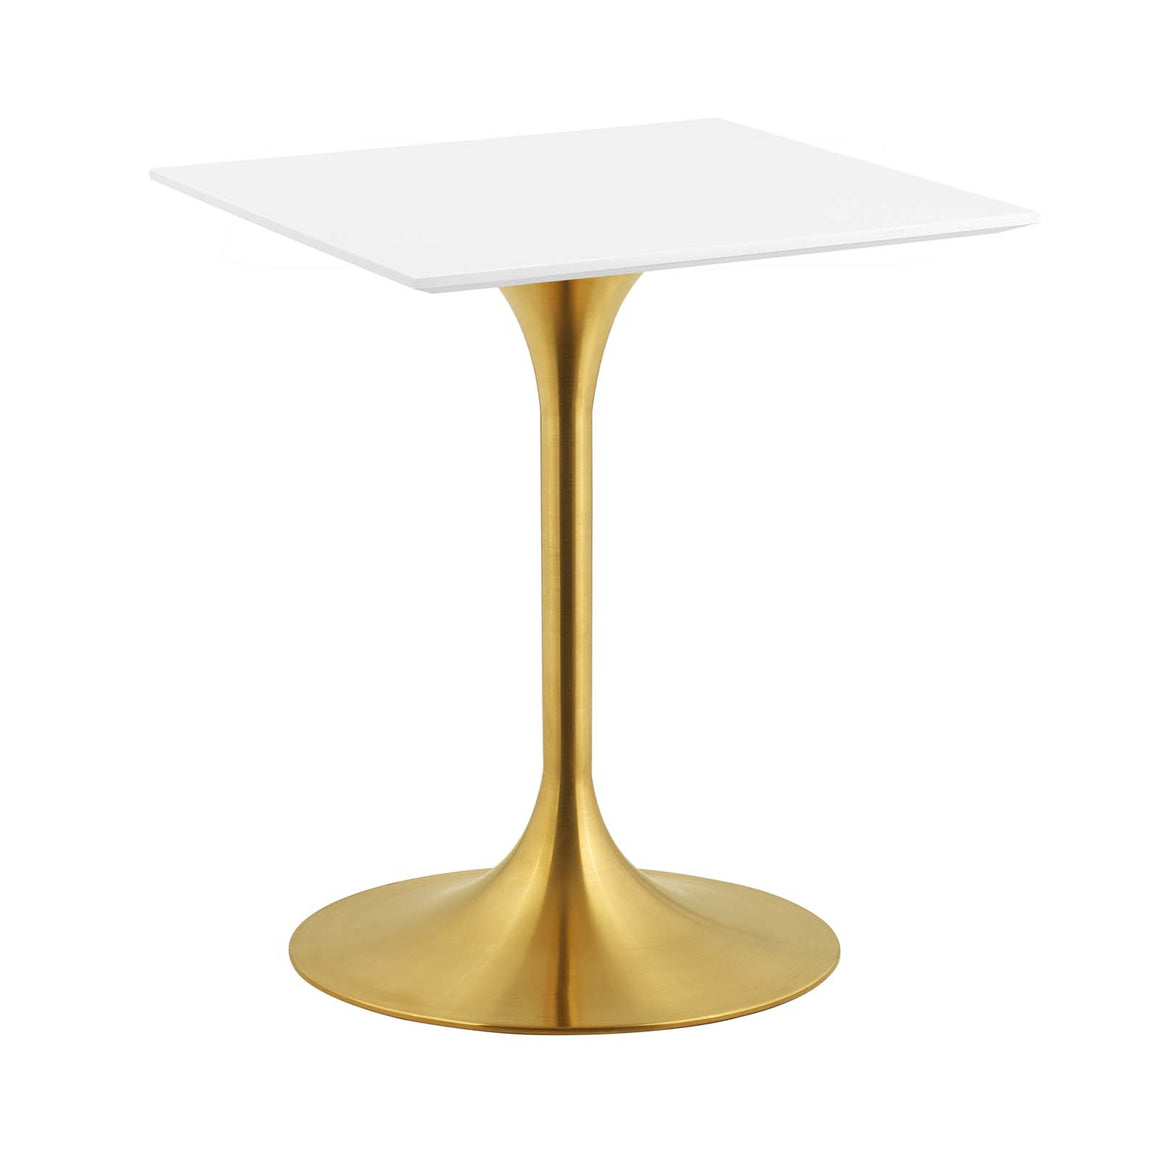 Lippa 24" Square Dining Table in Gold White